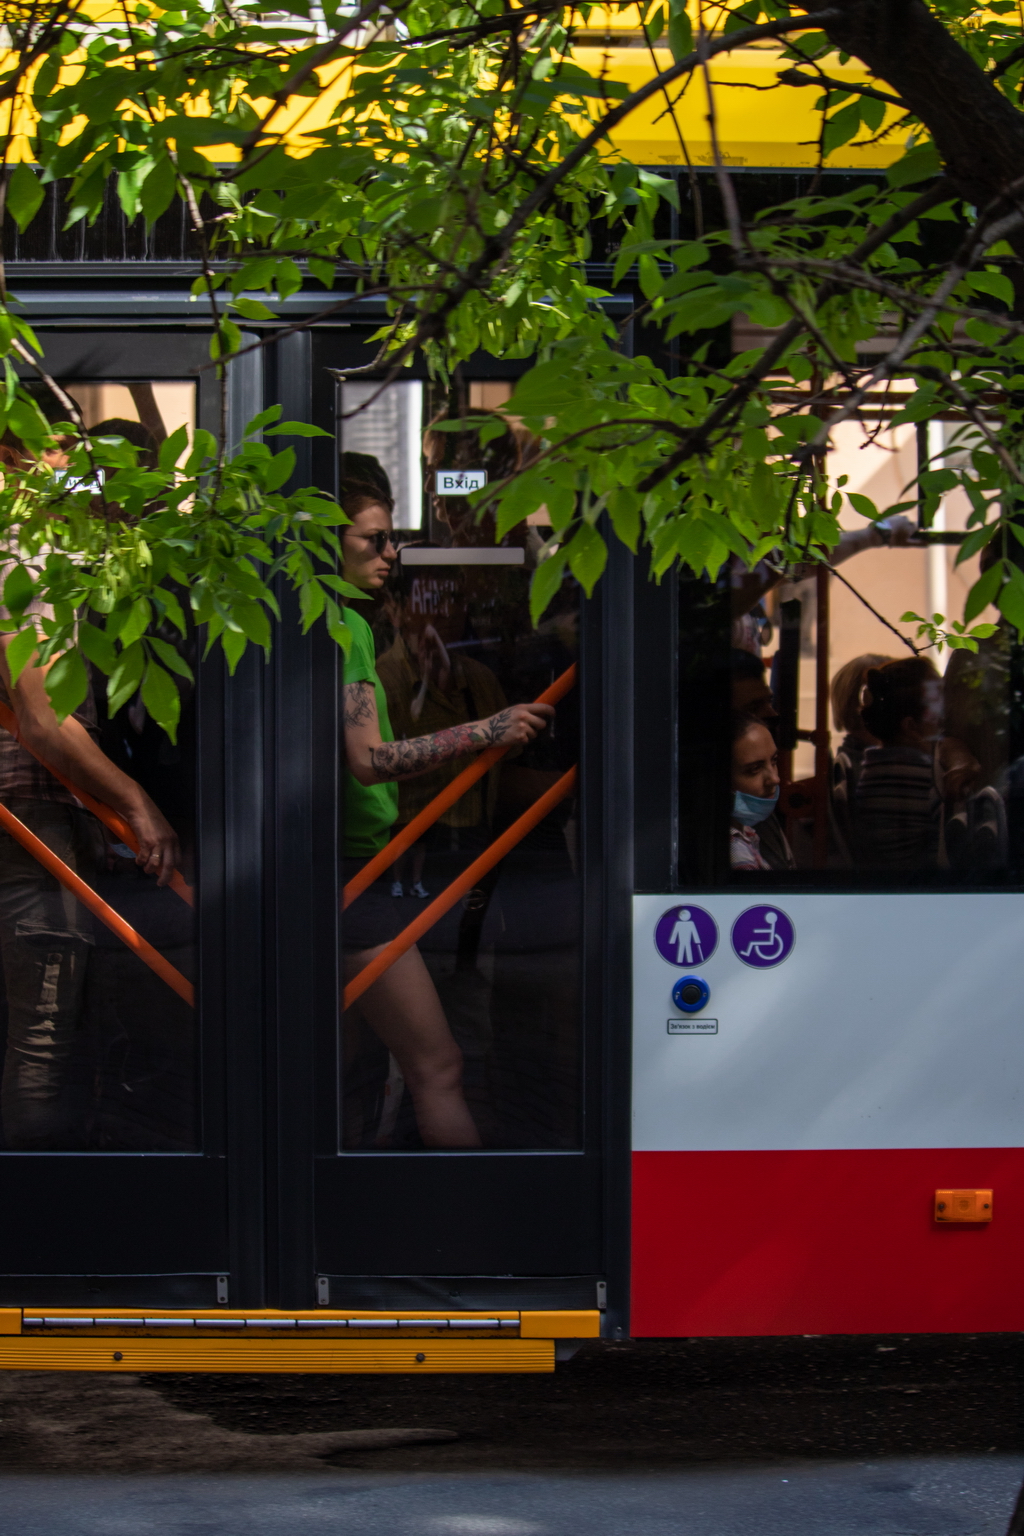 People ride in a trolley bus leaning against the door - Ukraine, Odessa, 11,06,2020